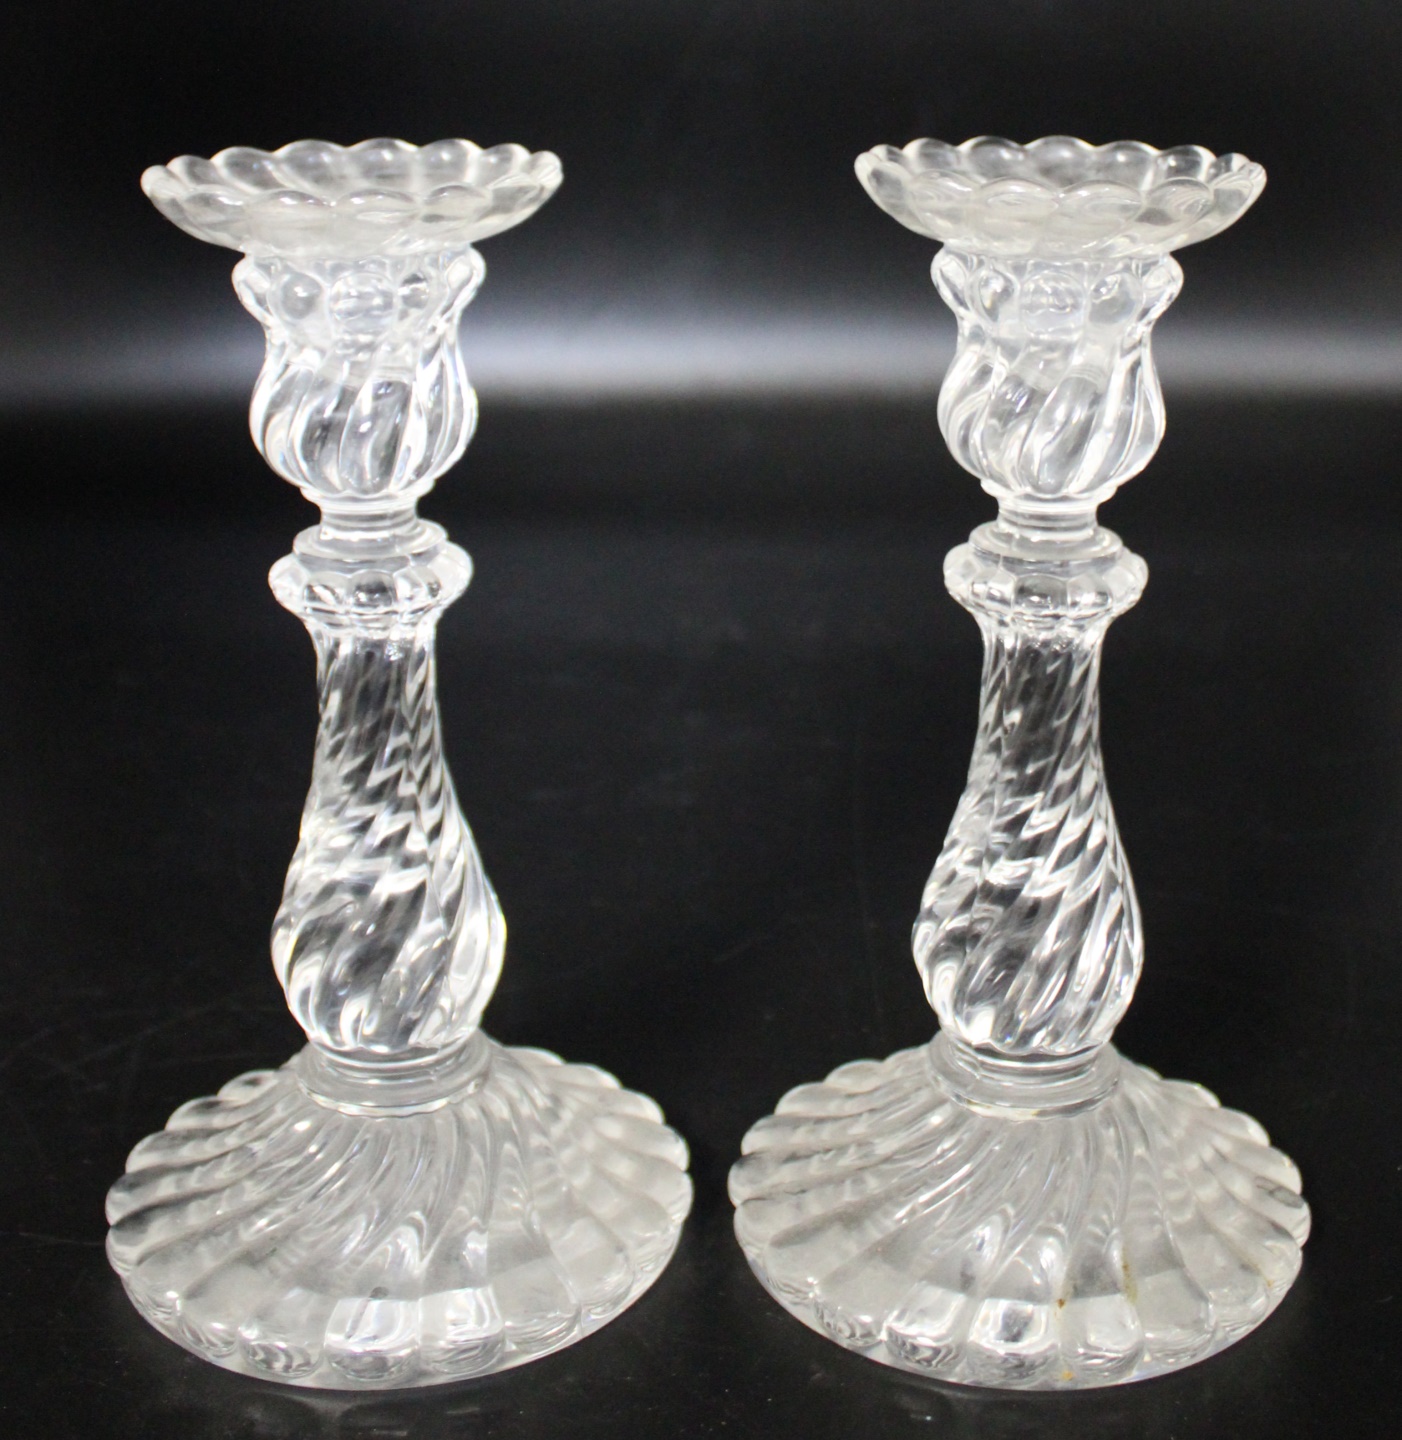 BACCARAT. PAIR OF GLASS CANDLE